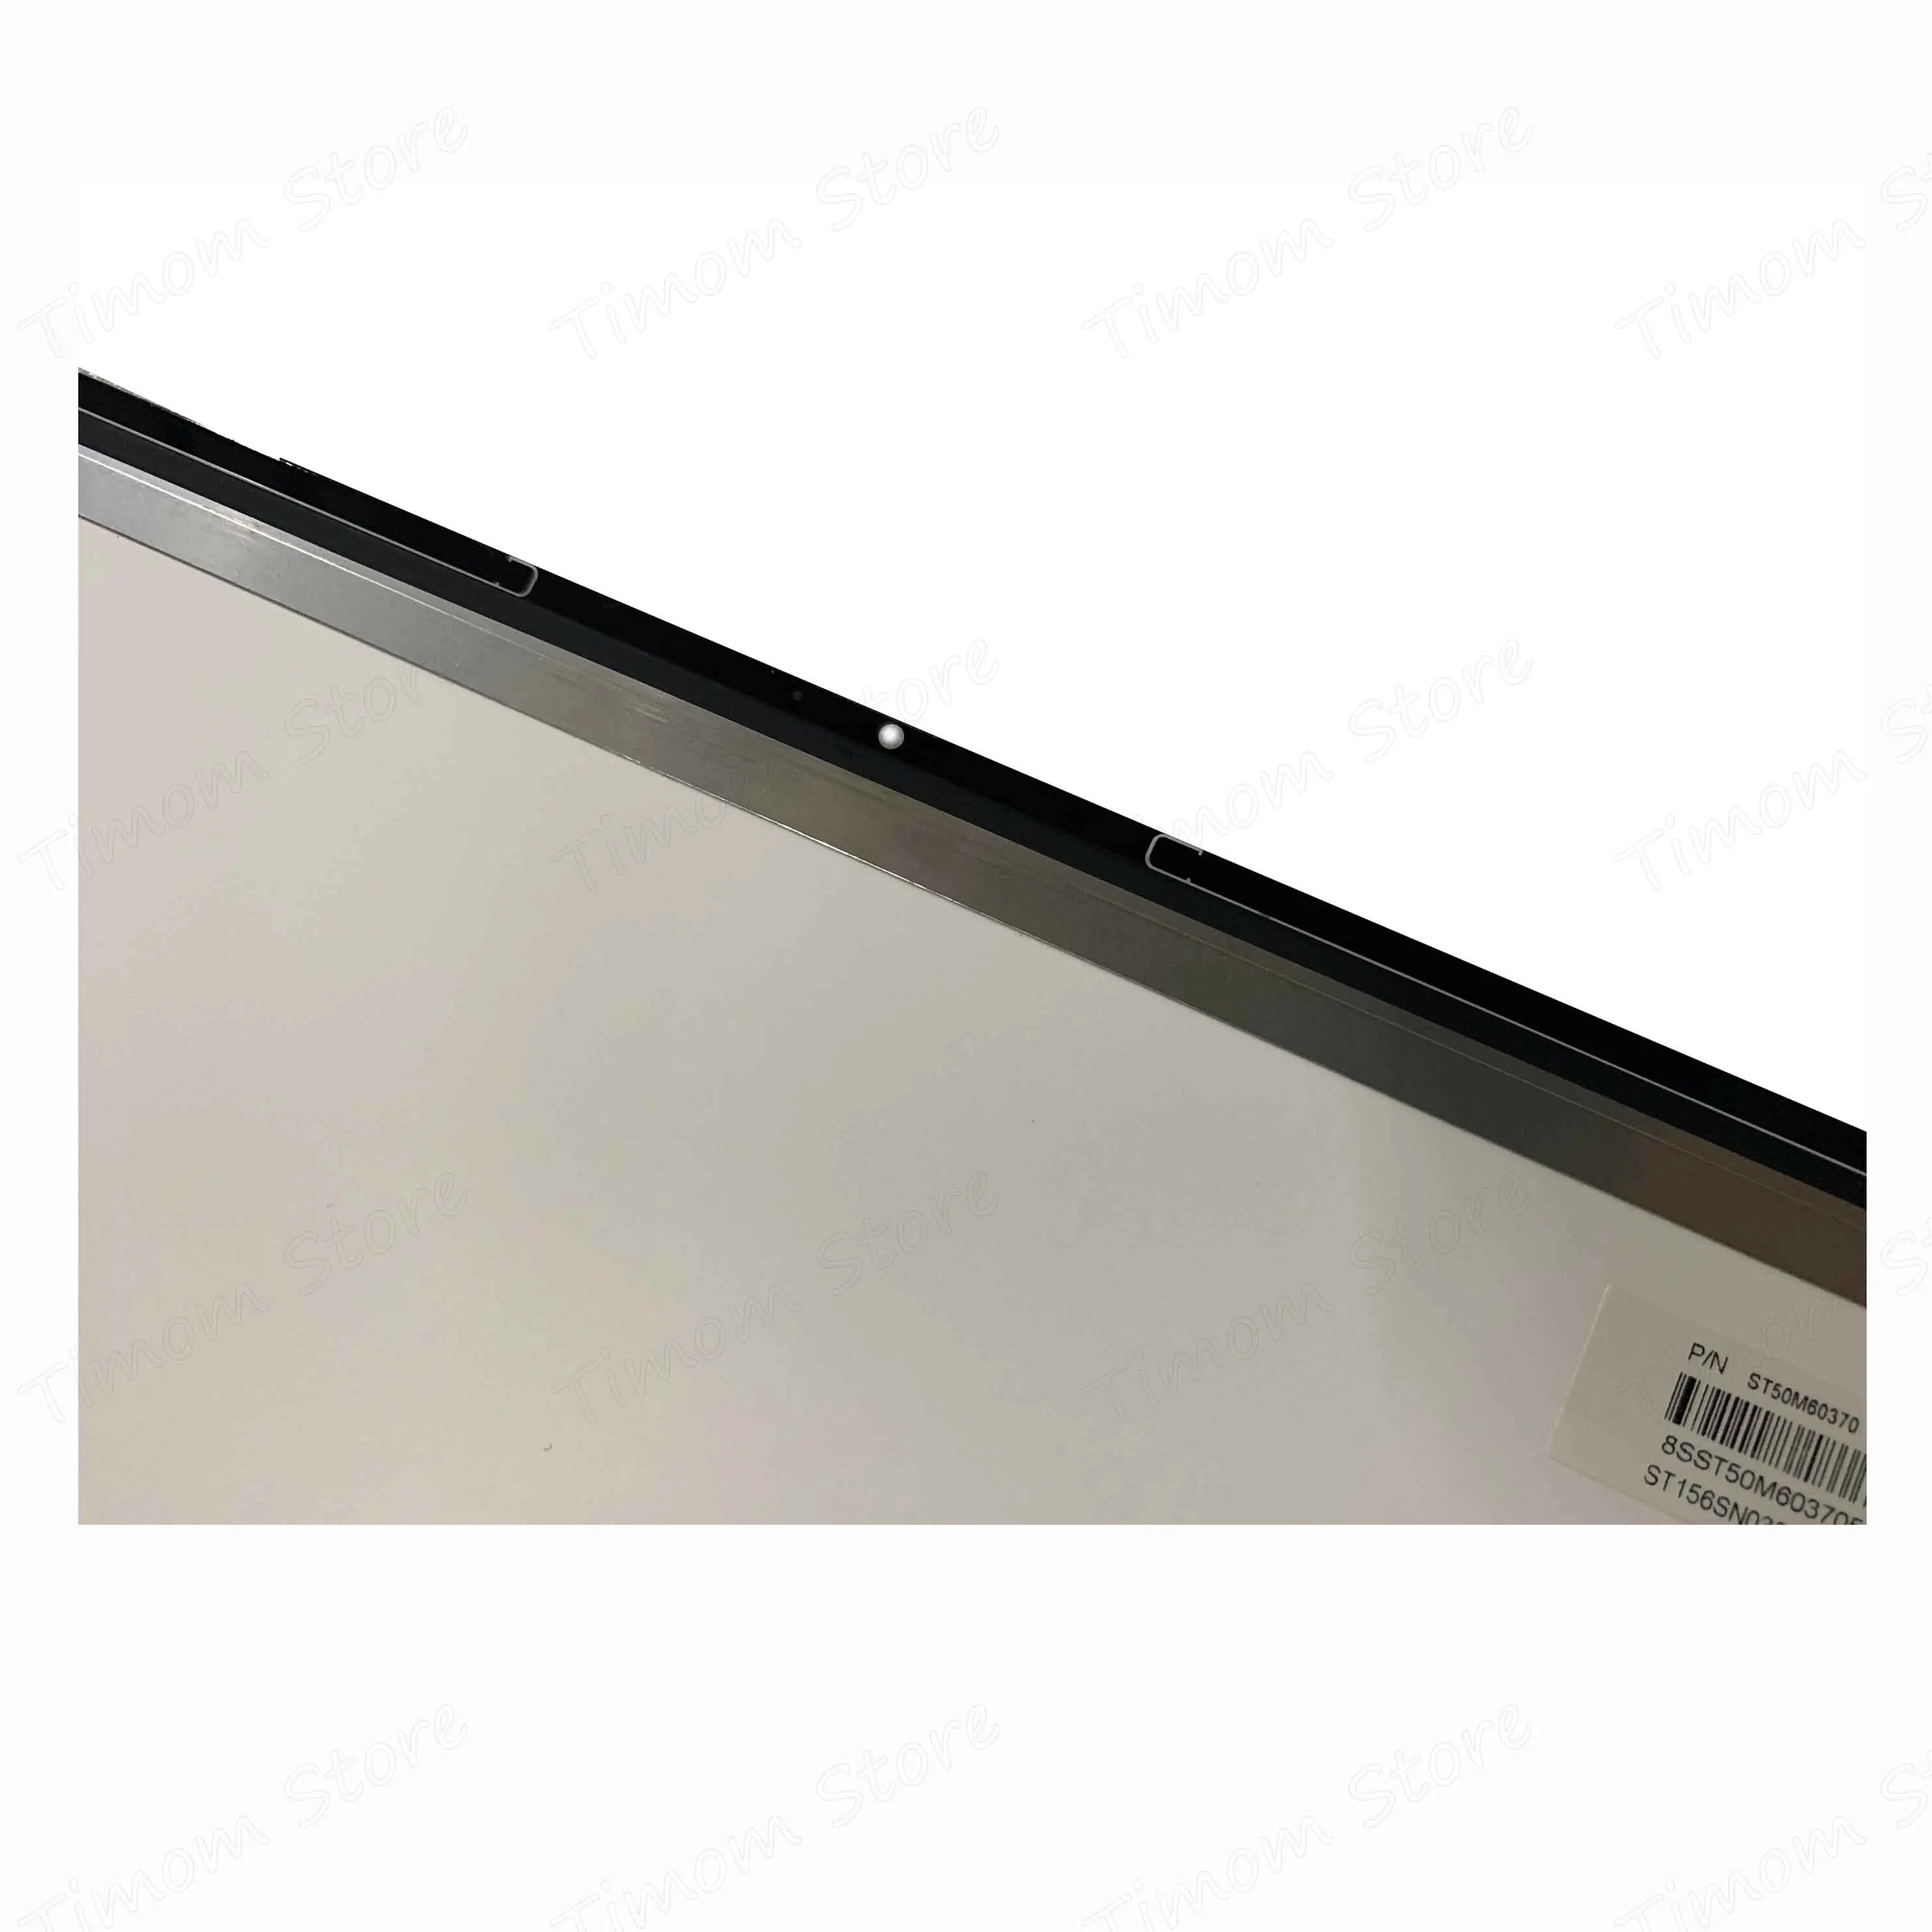 for yoga 720 15ikb 720 15 80x7 laptop lcd led touch assembly 15 6 inch screen 72 ntsc 60hz edp 30 pins fhd 19201080 ips matrix free global shipping